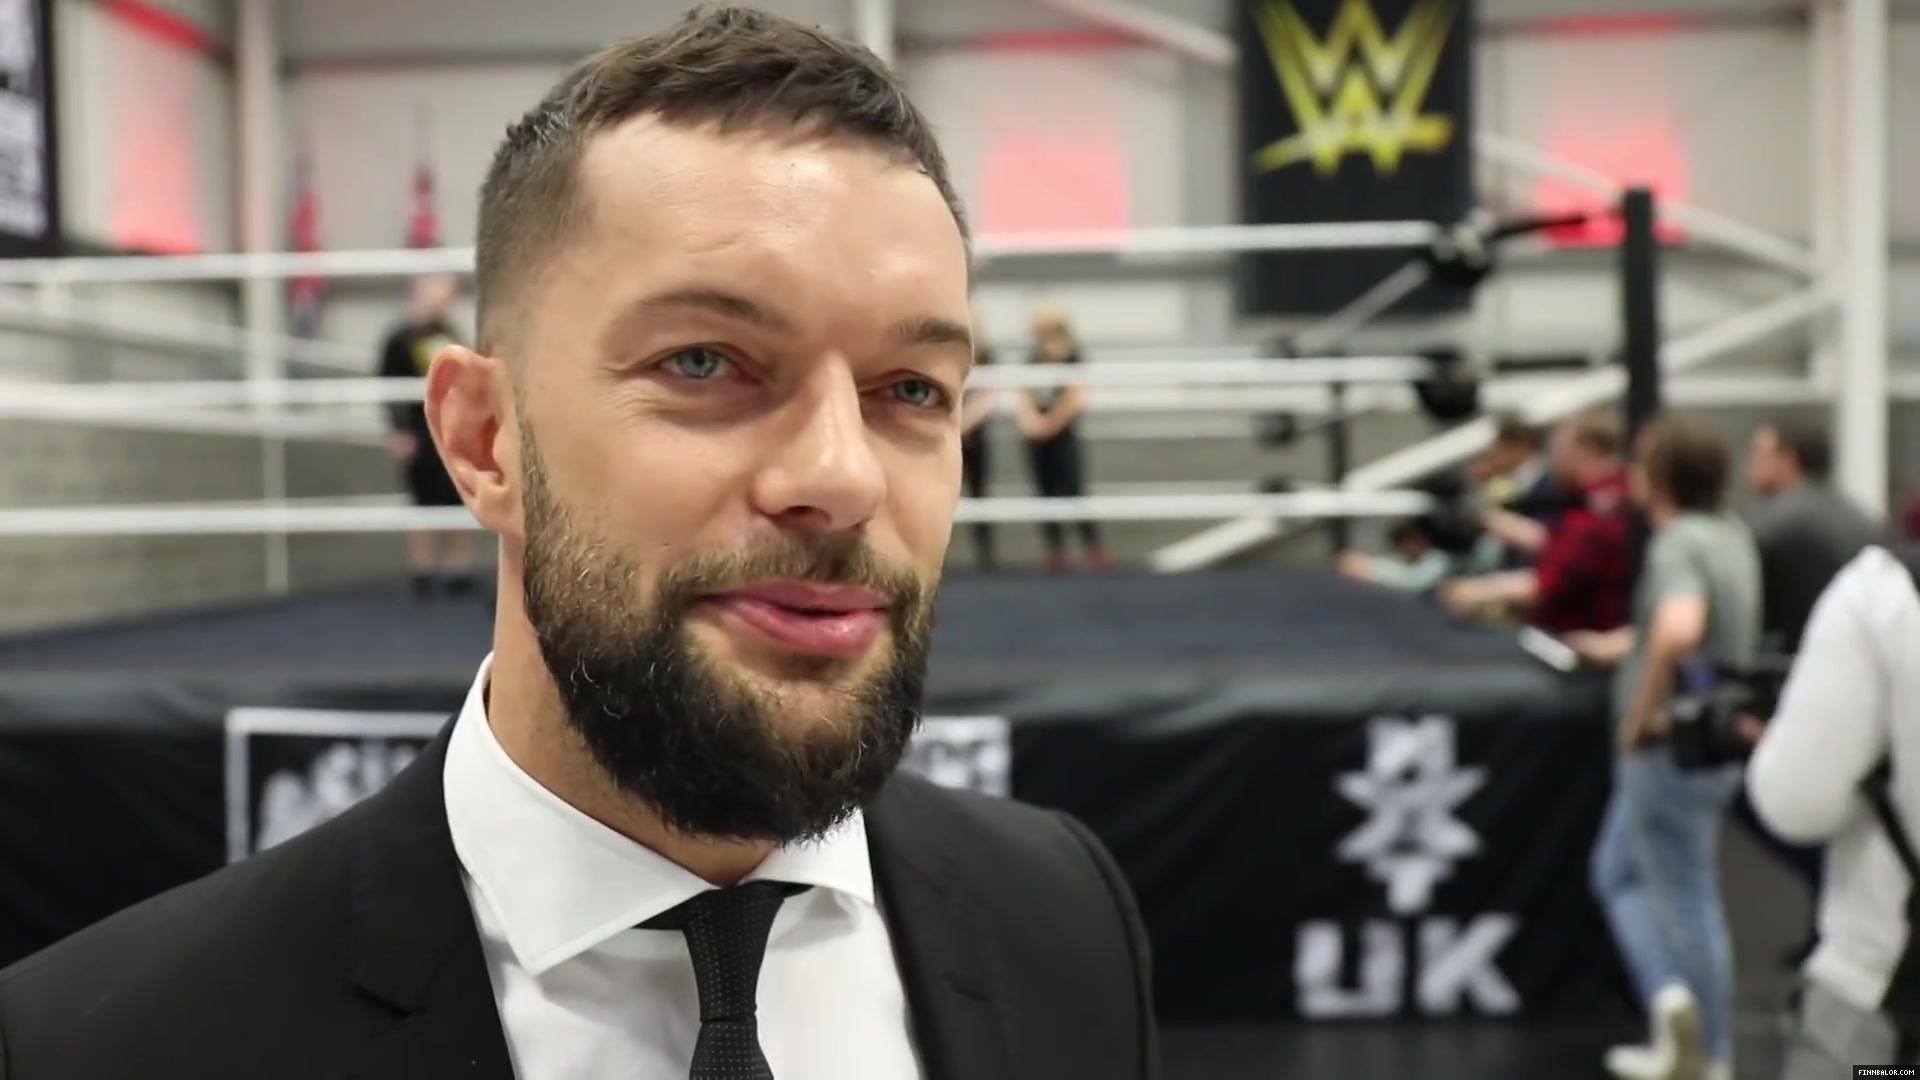 WWE_Superstar_FINN_BALOR_joins_MOUSTACHE_MOUNTAIN_at_the_opening_of_the_NXT_UK_PC_104.jpg